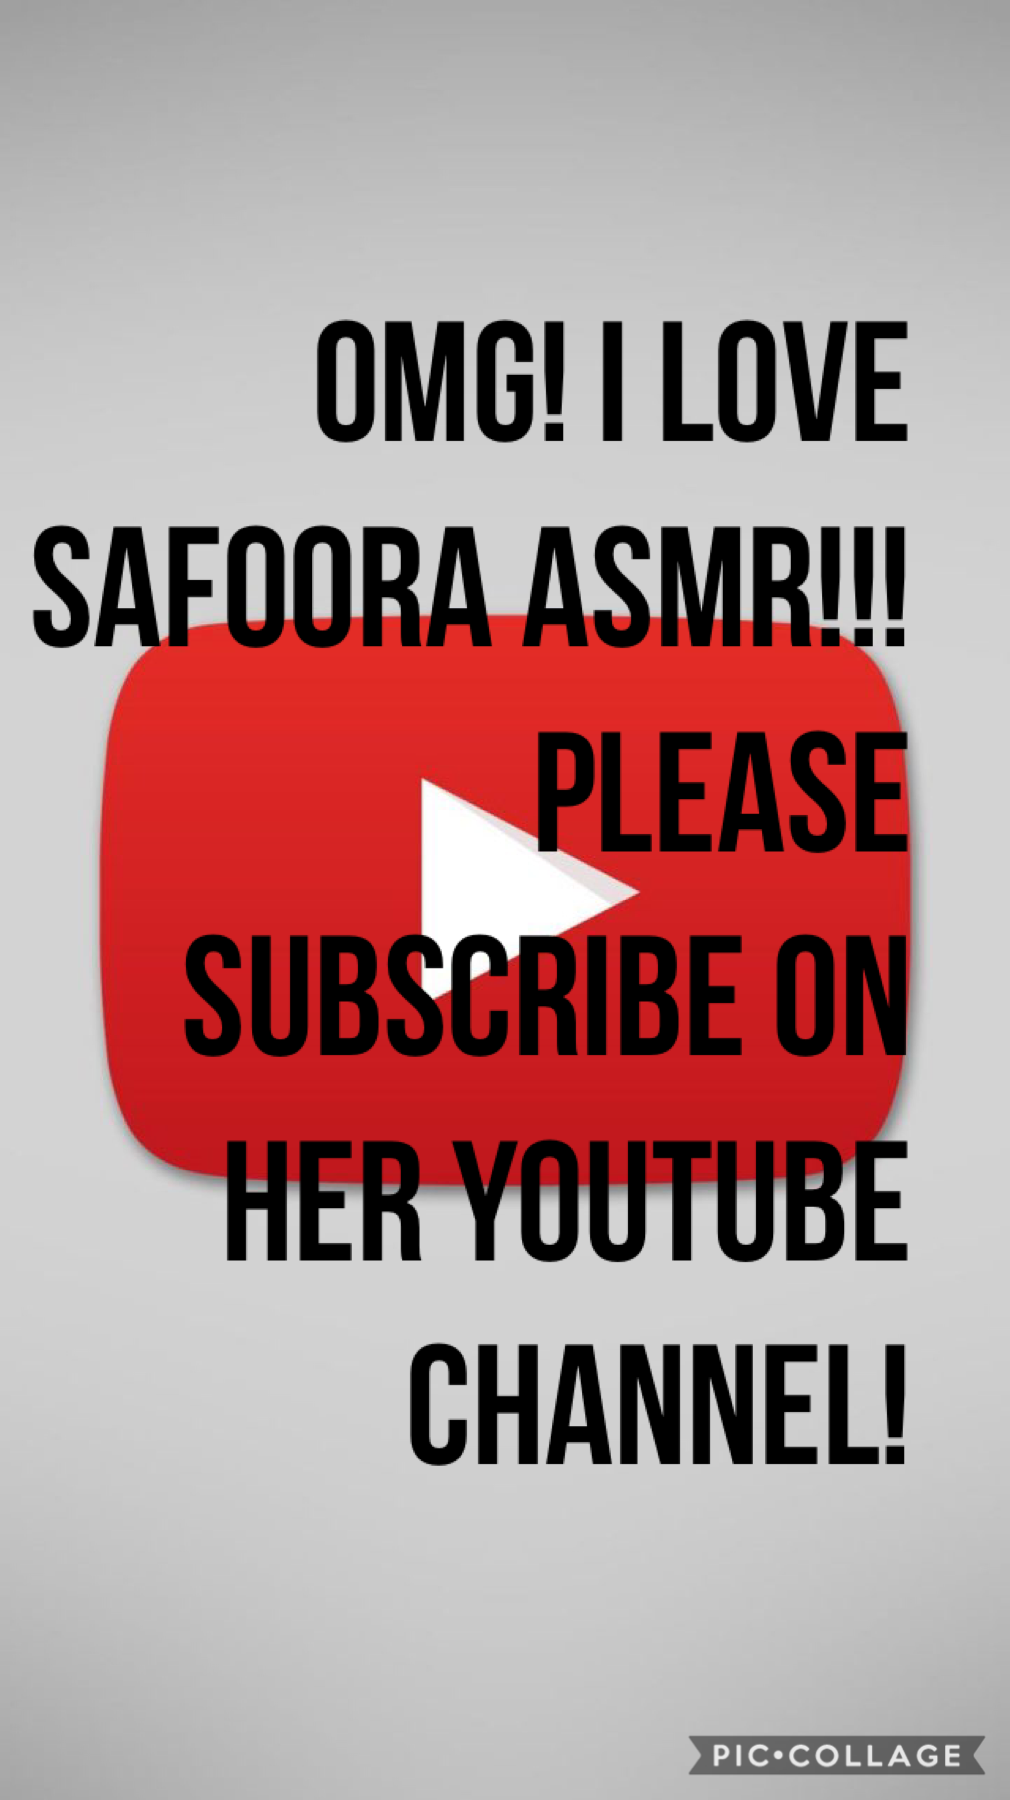 Please subscribe on her channel!! And follow me!!